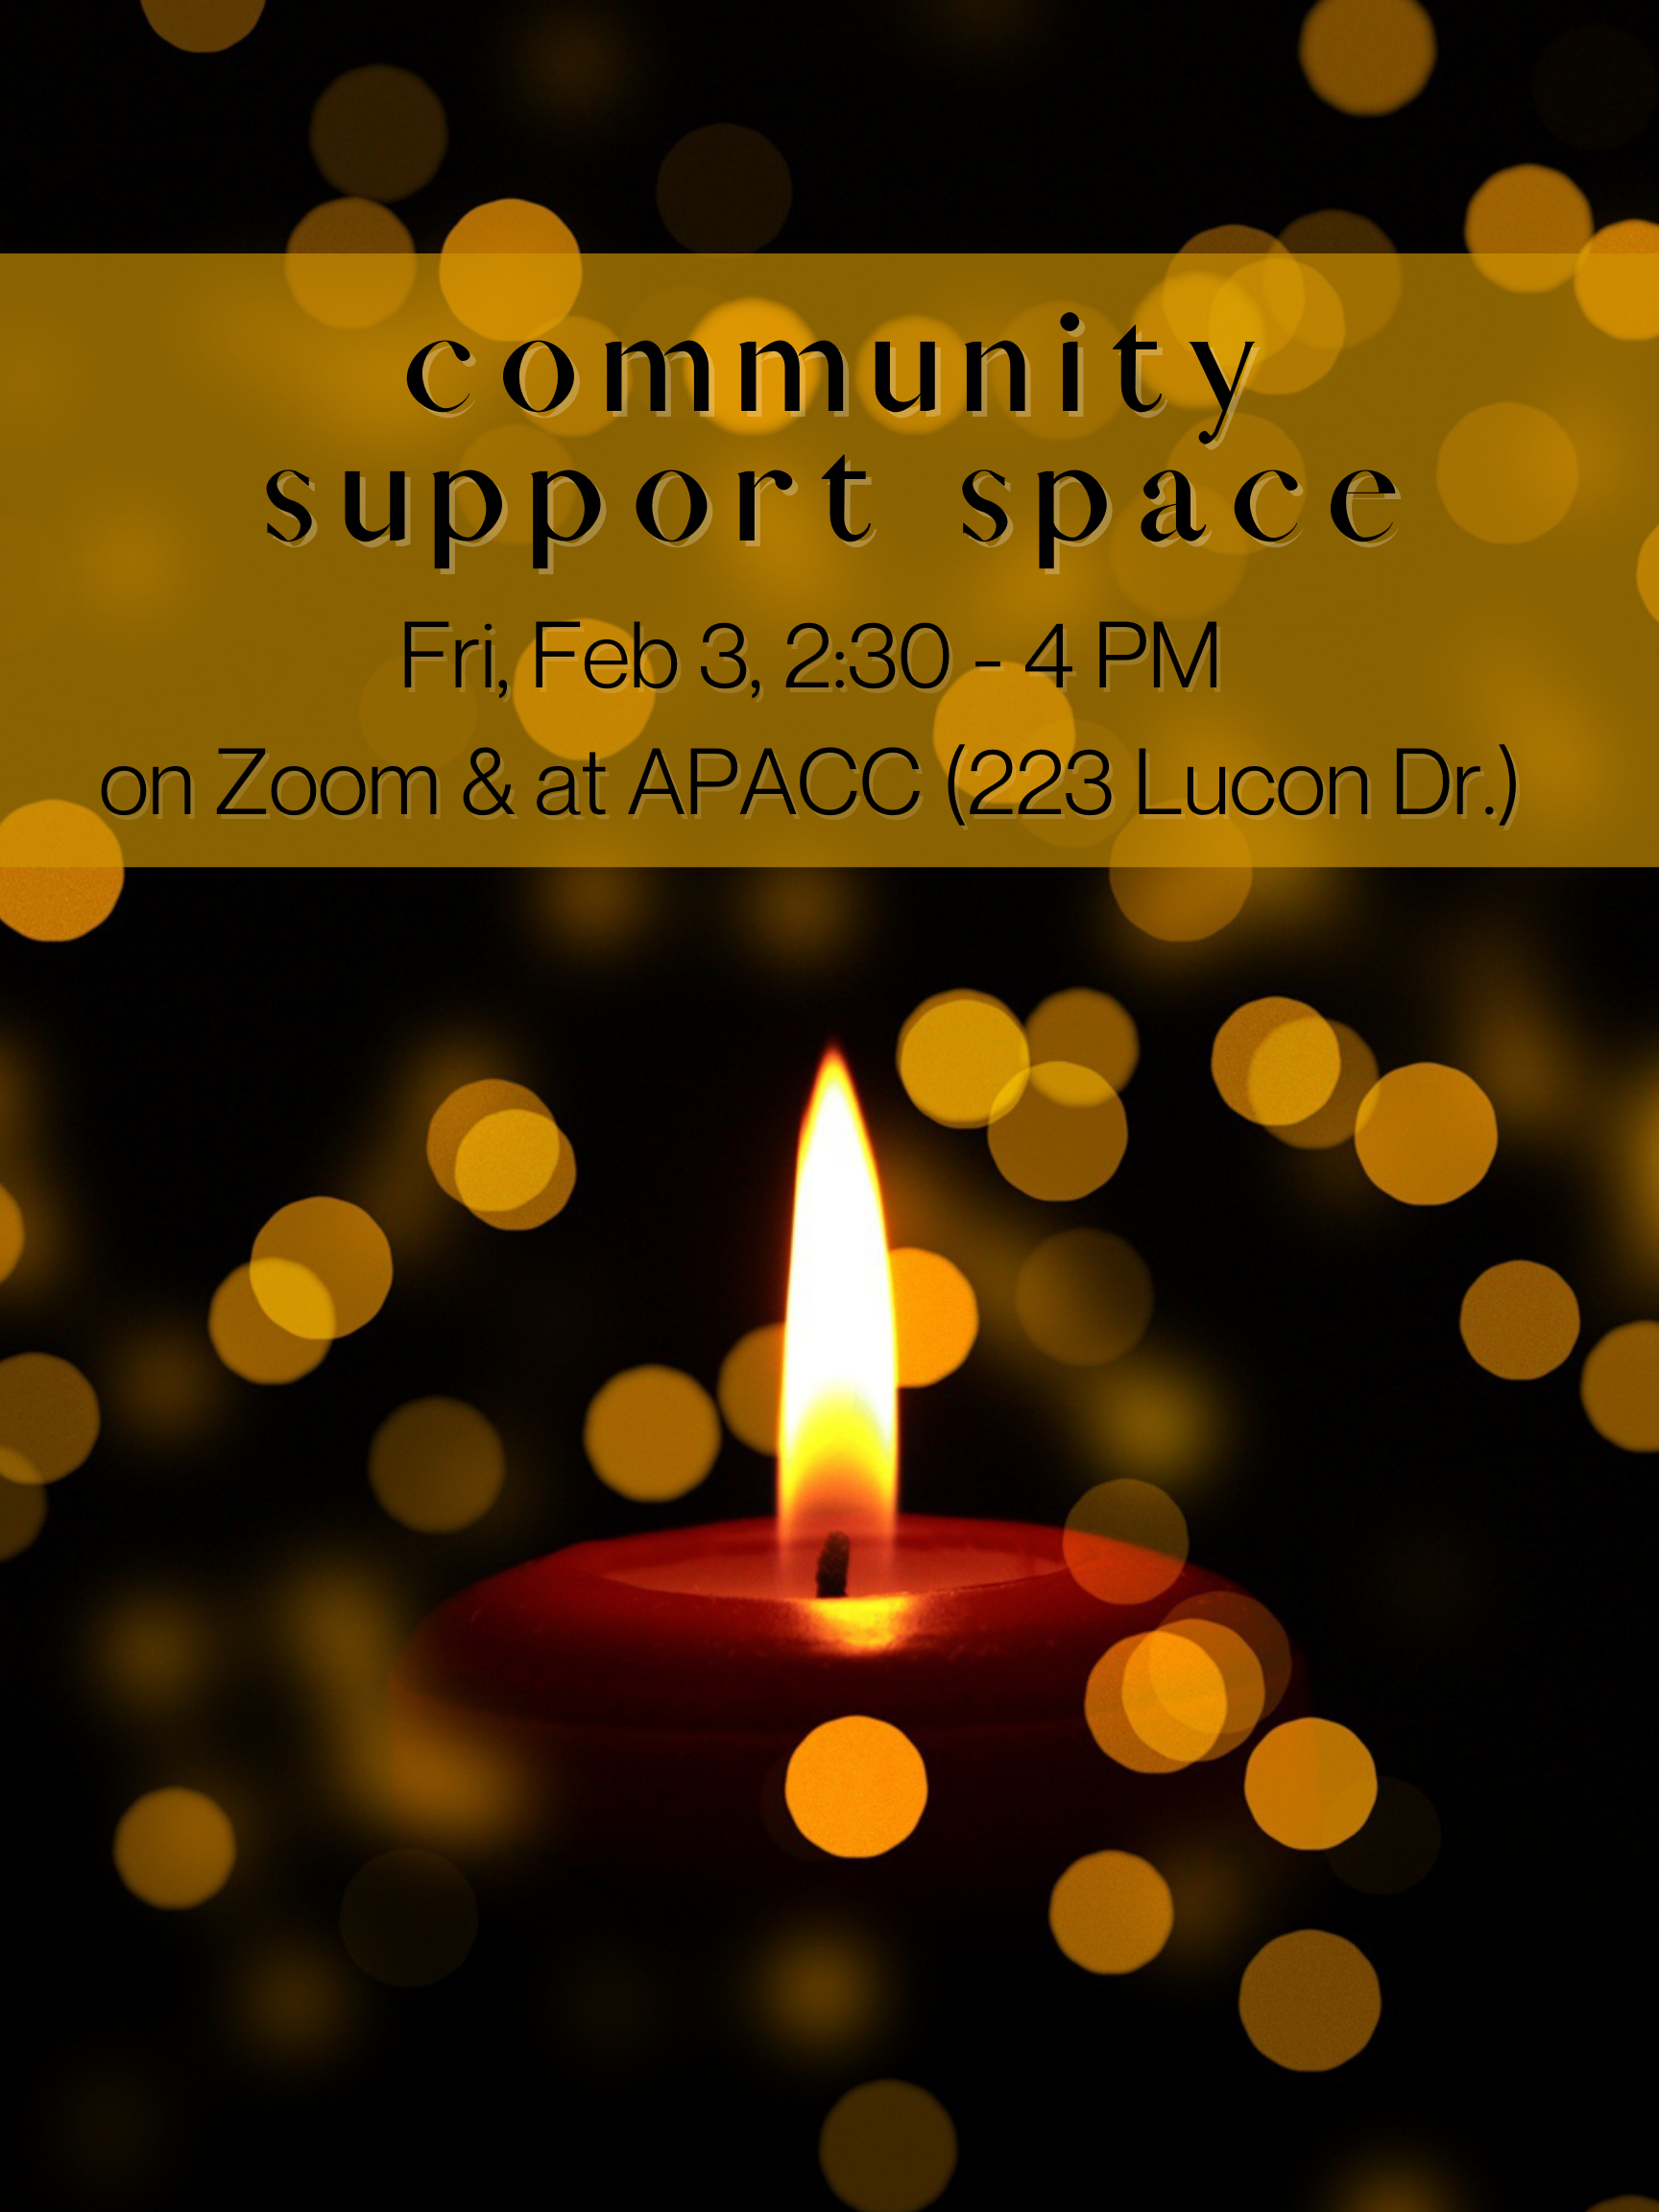 Black rectangle with red candle in middle. Yellow box at top has black text that says "community support space. Friday, February 3, 2:30 - 4 PM on Zoom & at APACC (223 Lucon Dr.)"